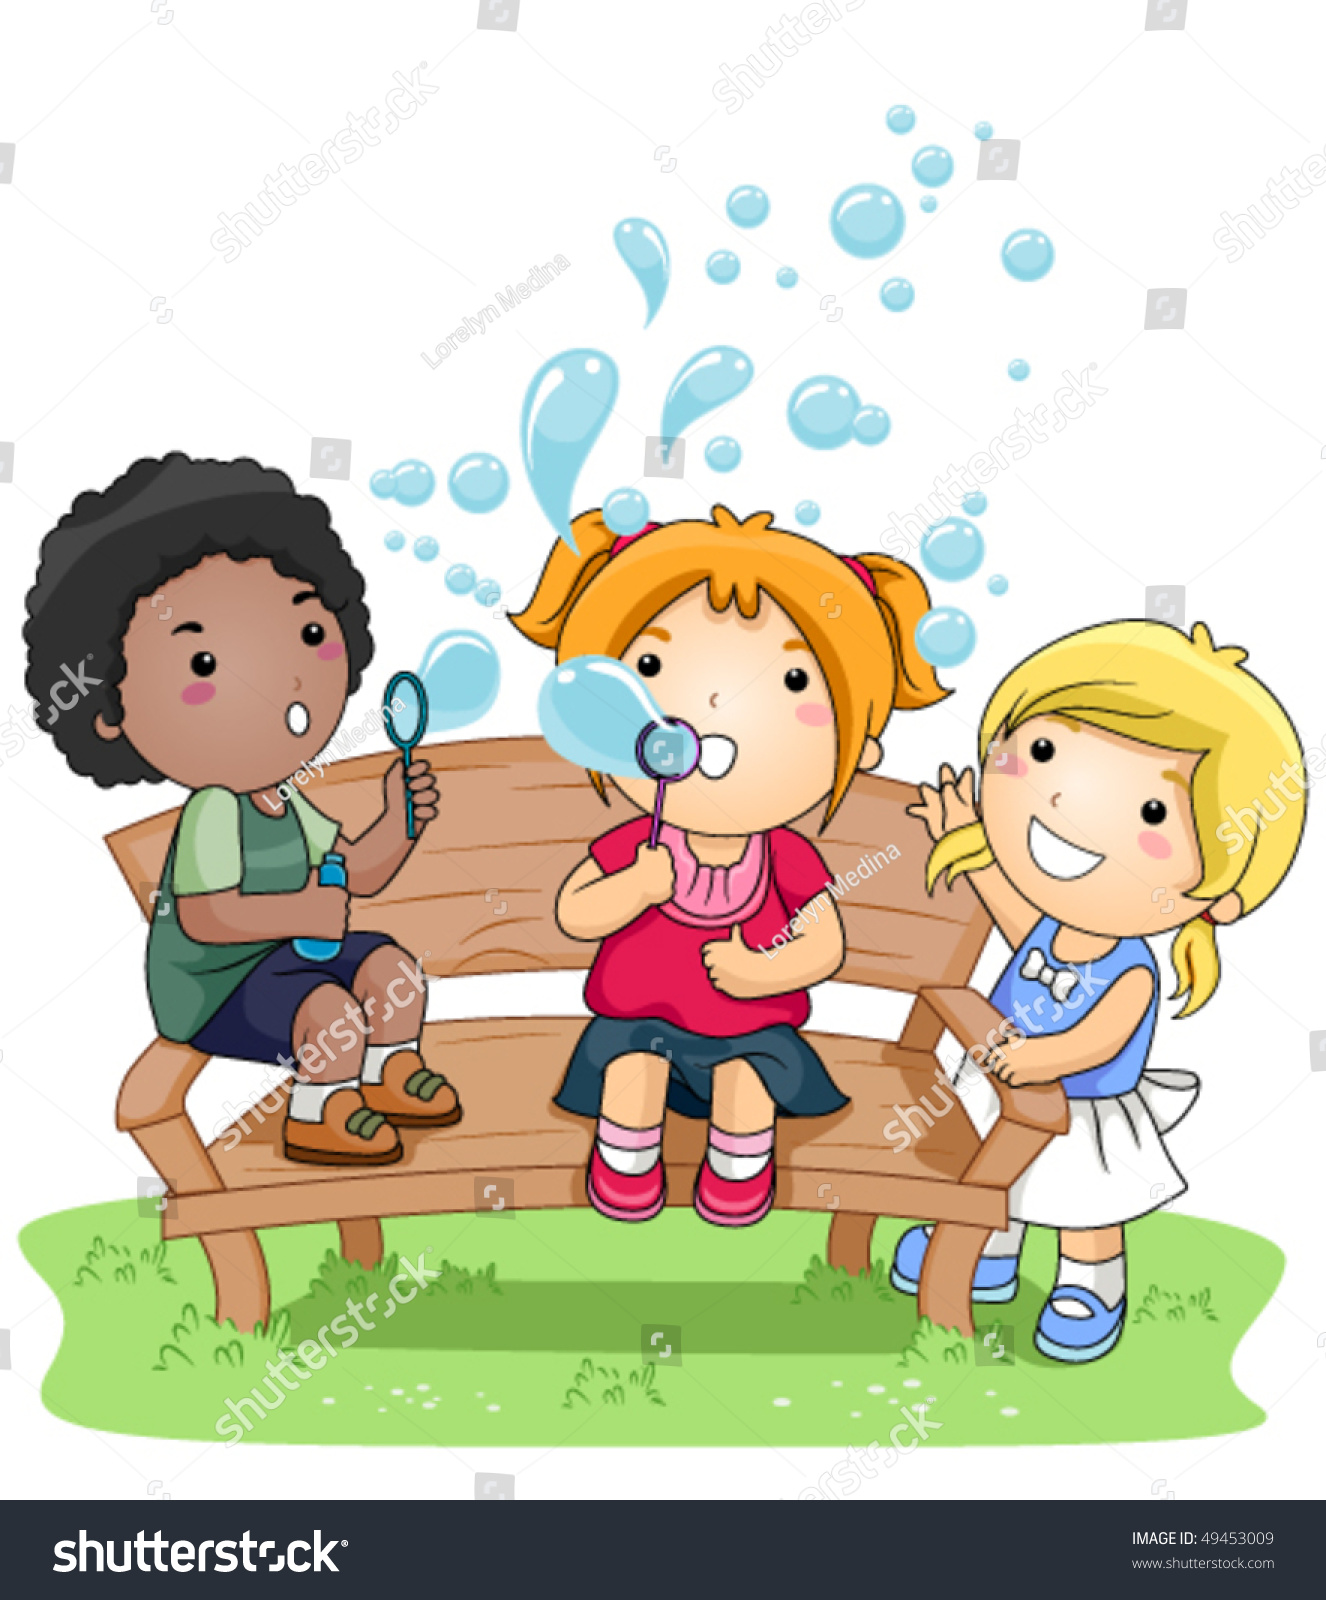 Children Blowing Bubbles Park Vector Stock Vector Royalty Free